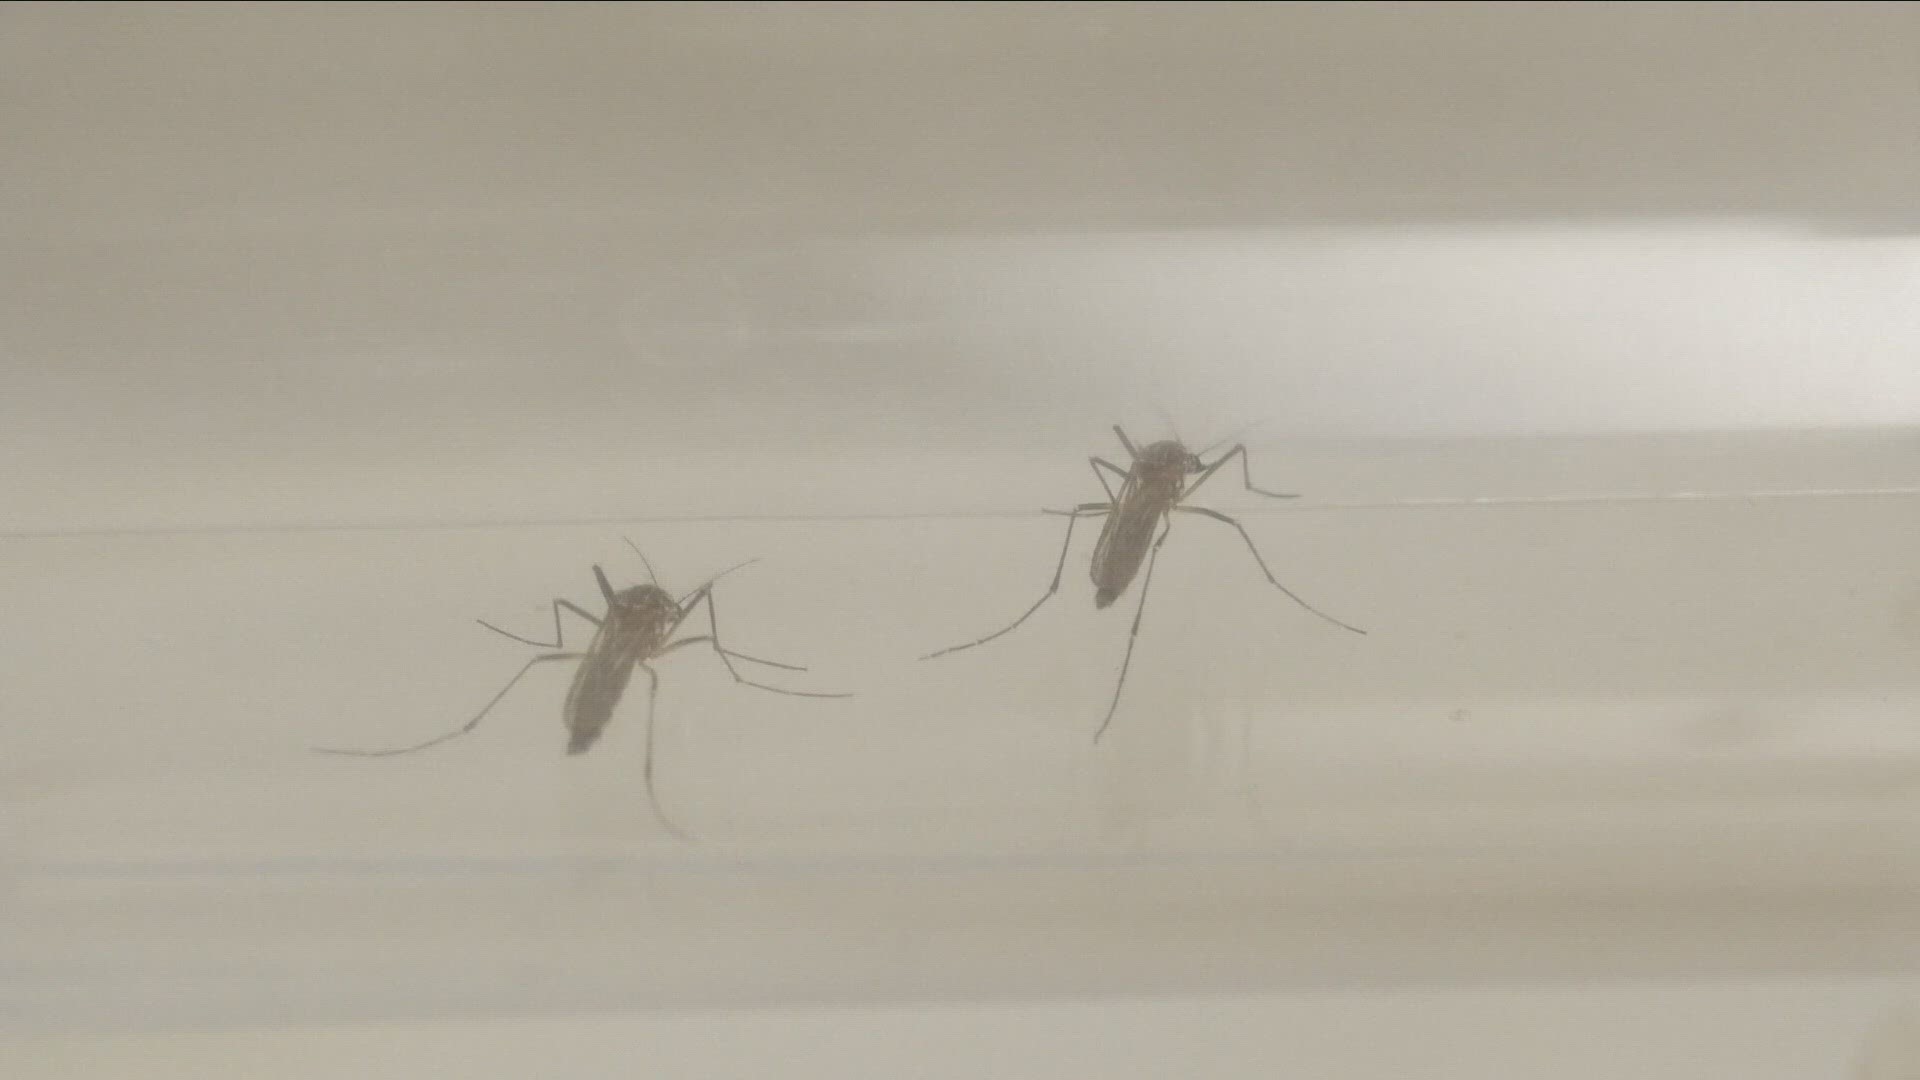 While WNY's mosquito population appeared down in early summer, experts say their numbers were likely reduced by conditions prior to the smoky invasion from up north